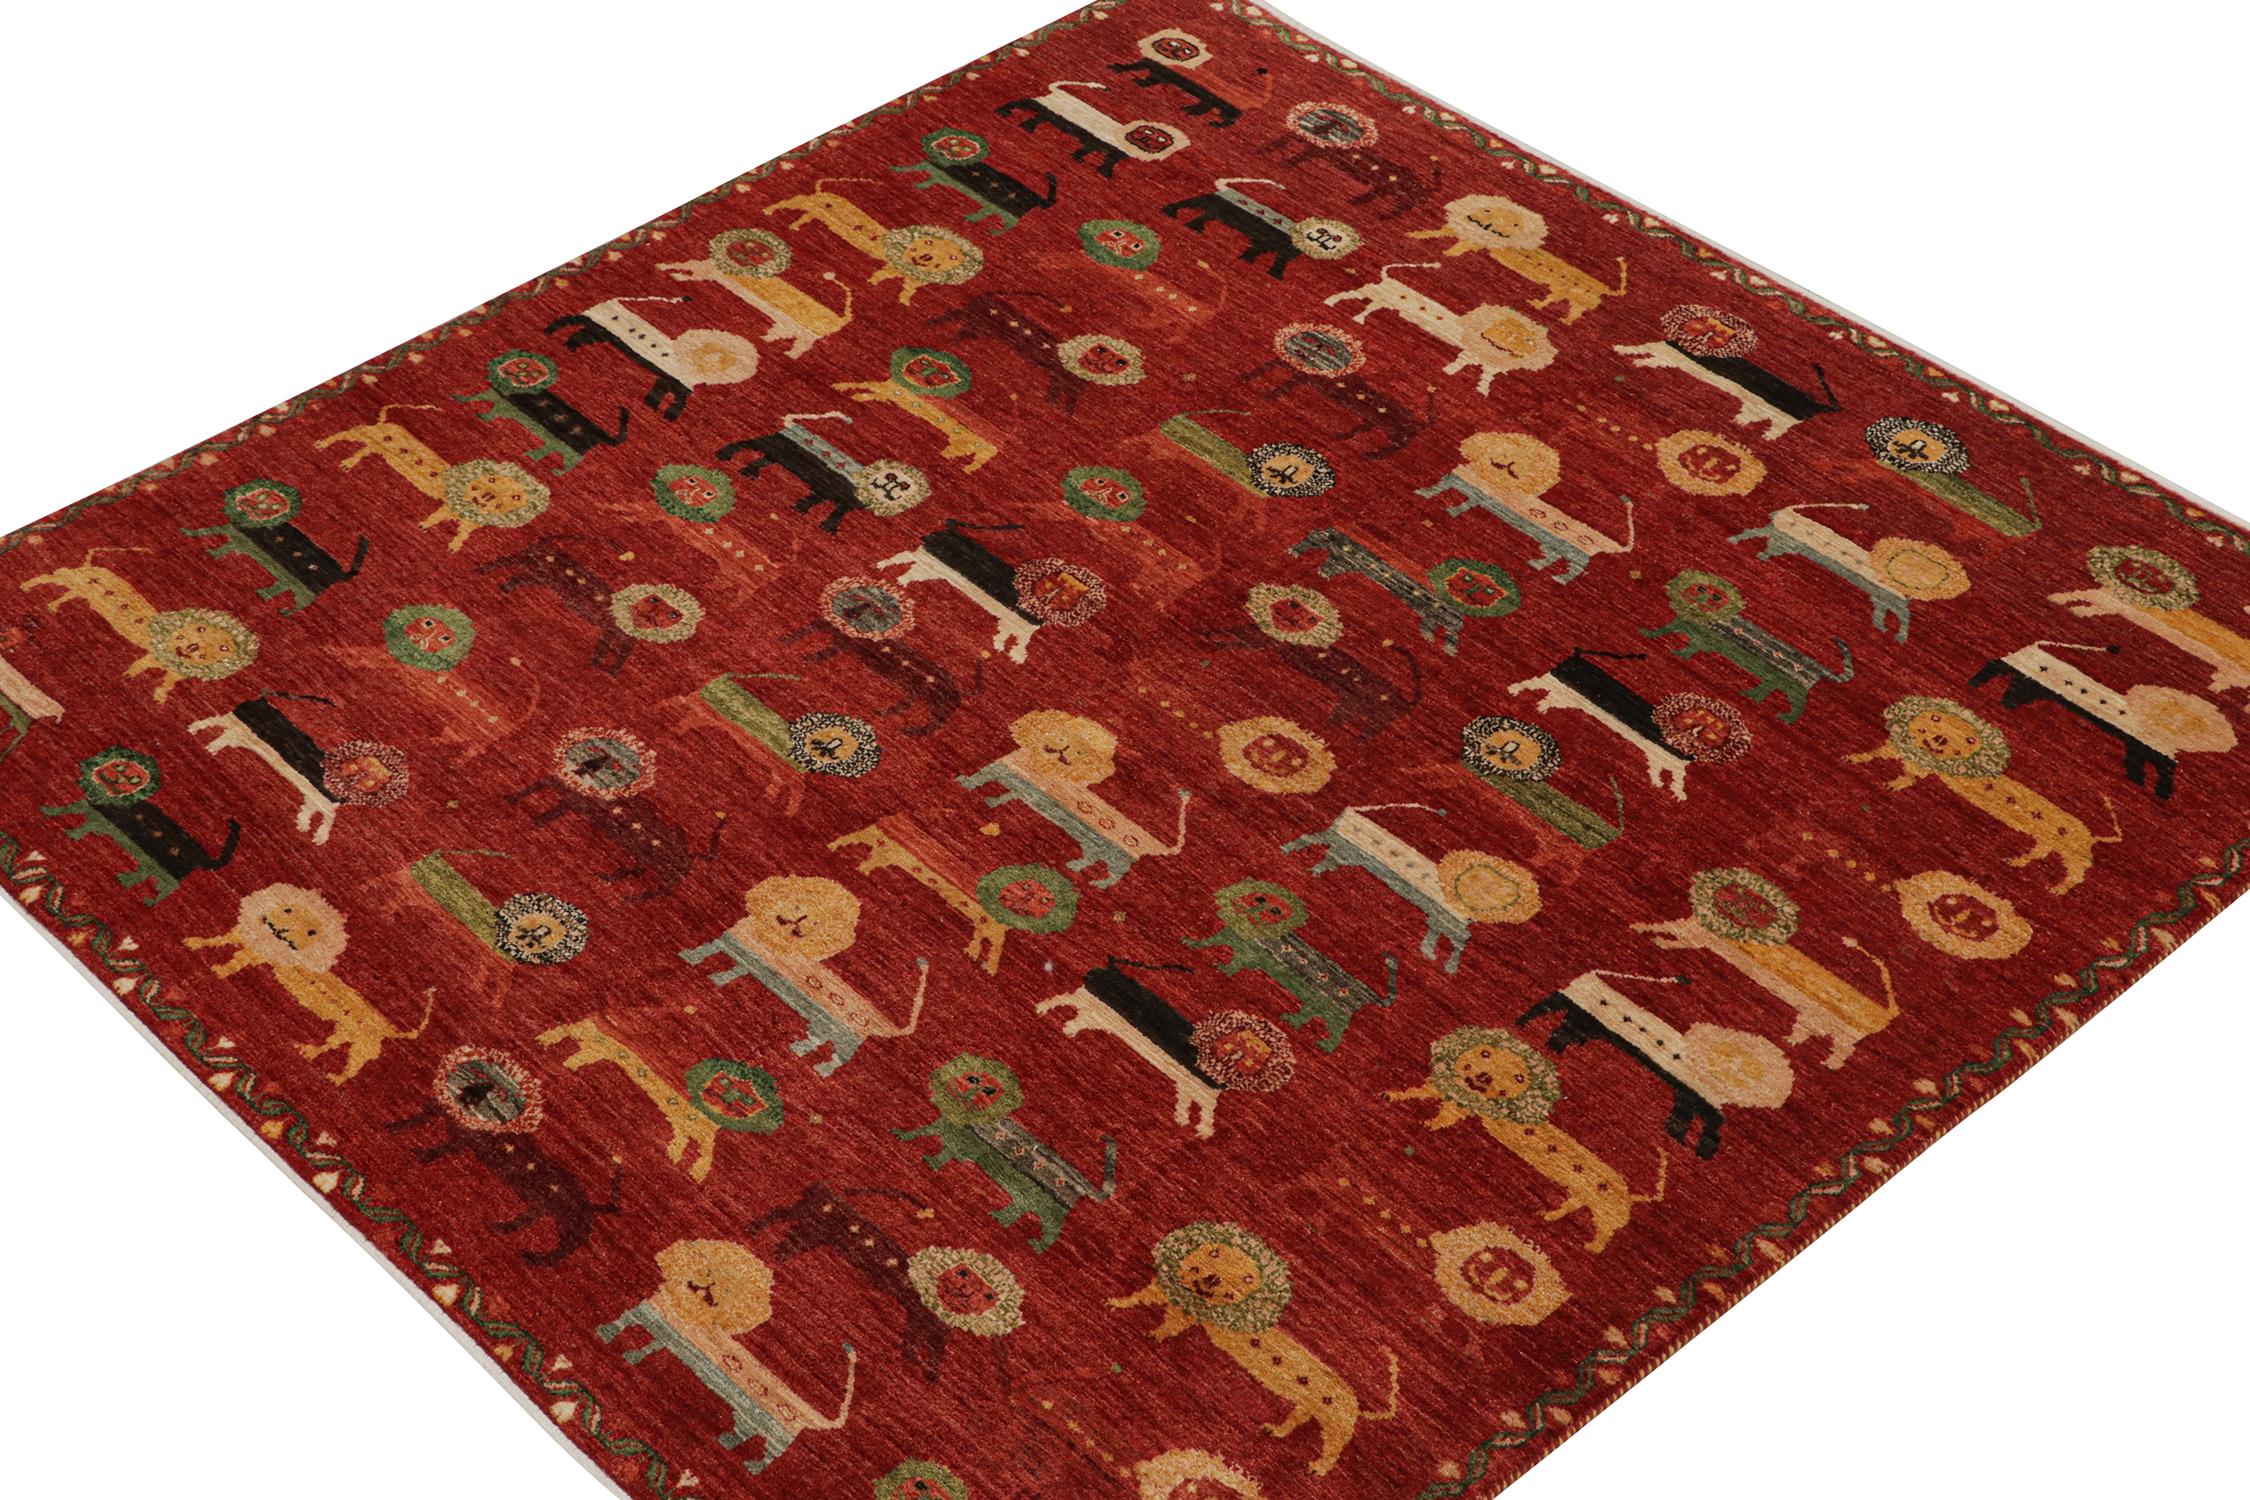 A 7x7 rug inspired by antique Persian Gabbeh rugs—from Rug & Kilim’s Modern Classics Collection. Hand-knotted in wool, it depicts a playful symphony of bright and rich lion pictorials on a red field background. 

Further On the Design:

The play